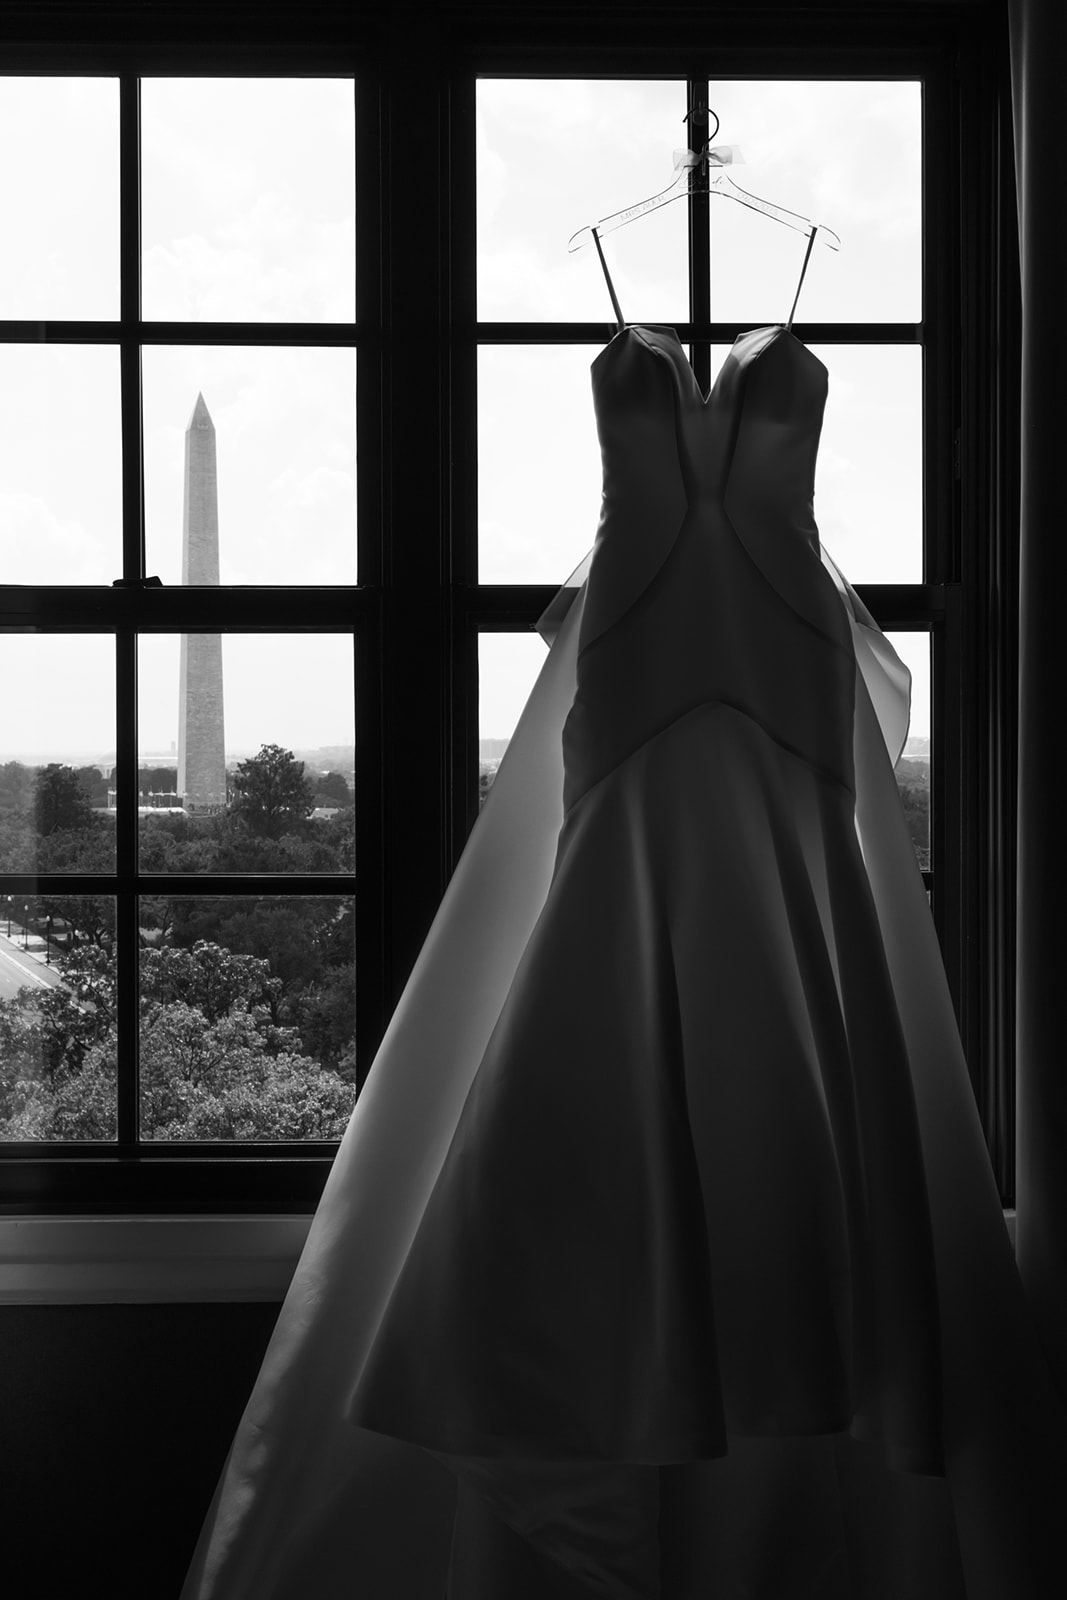 Bride's dress in the window at the Hotel Washington with Washington Monument in background